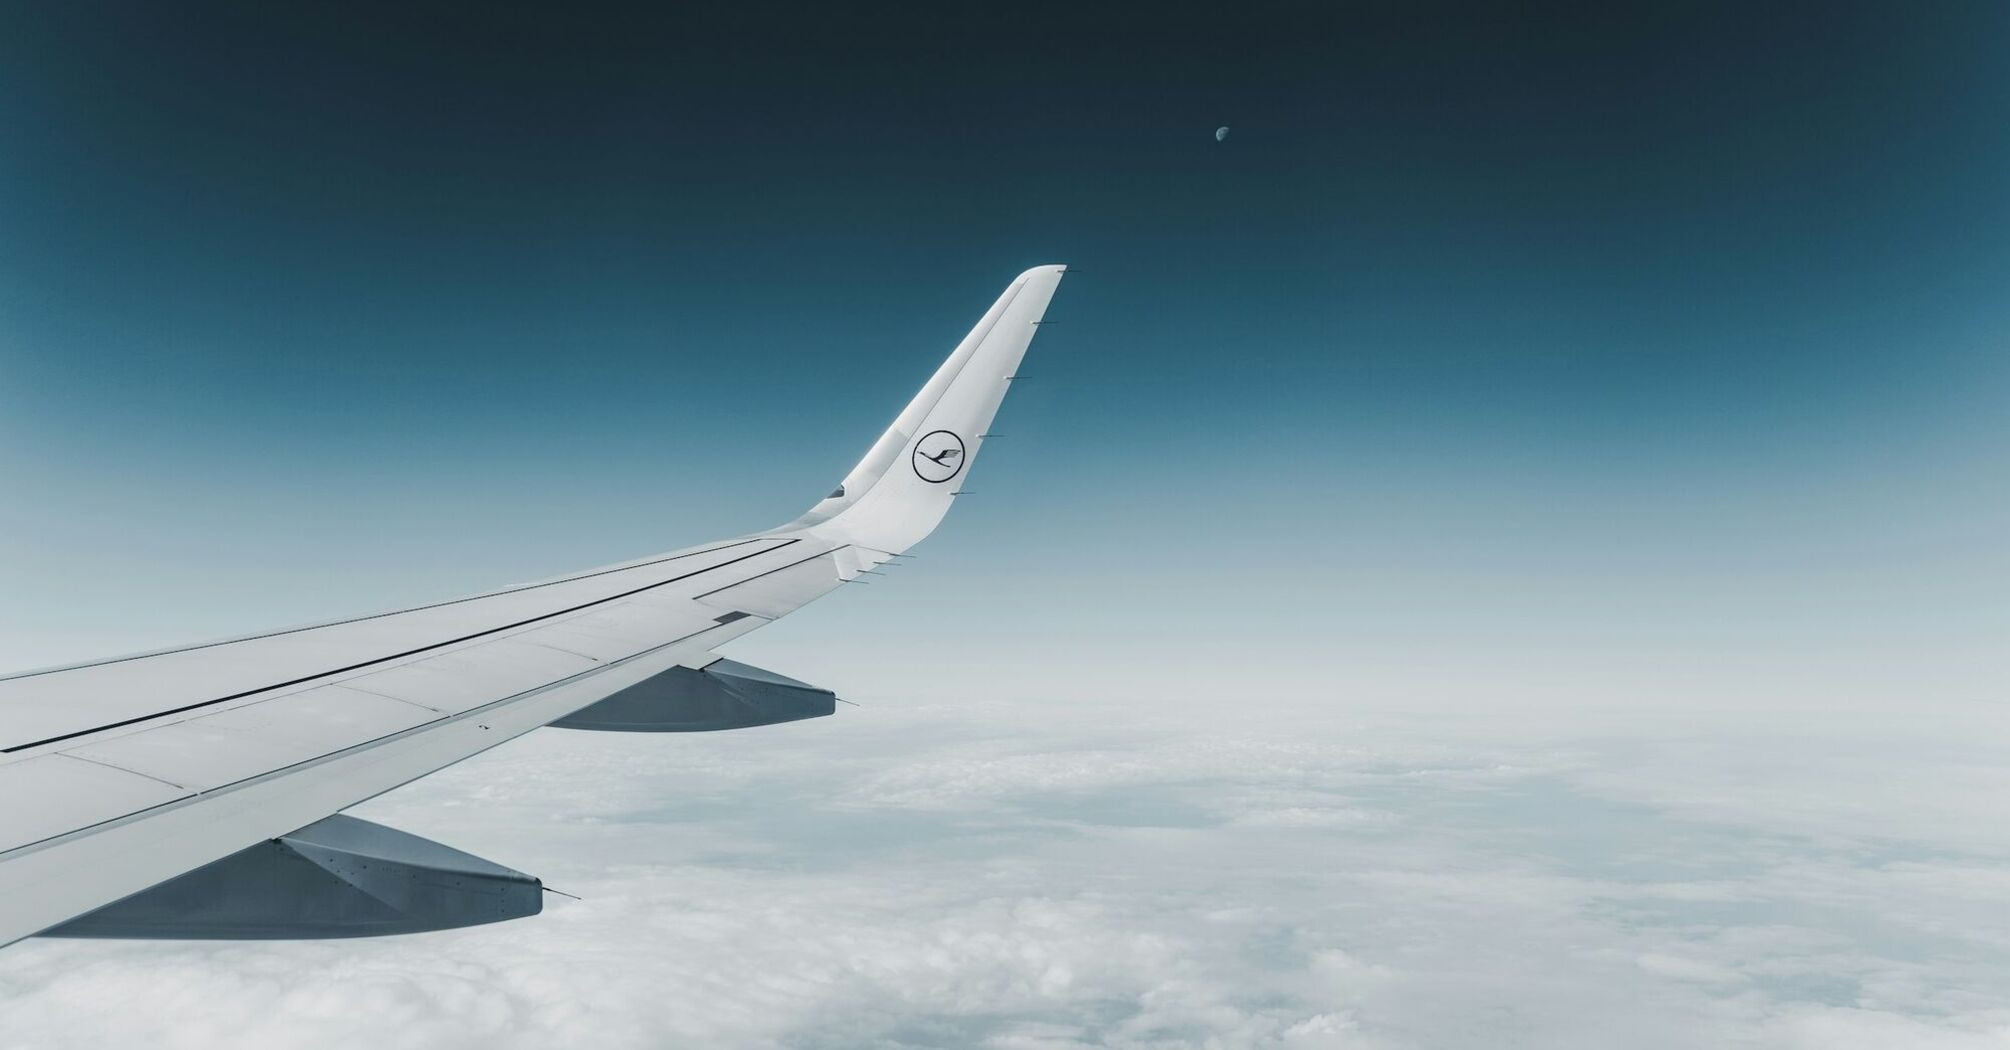 View from the wing of an airplane flying high above the clouds with the Lufthansa logo visible on the wingtip, clear skies and the moon in the distance